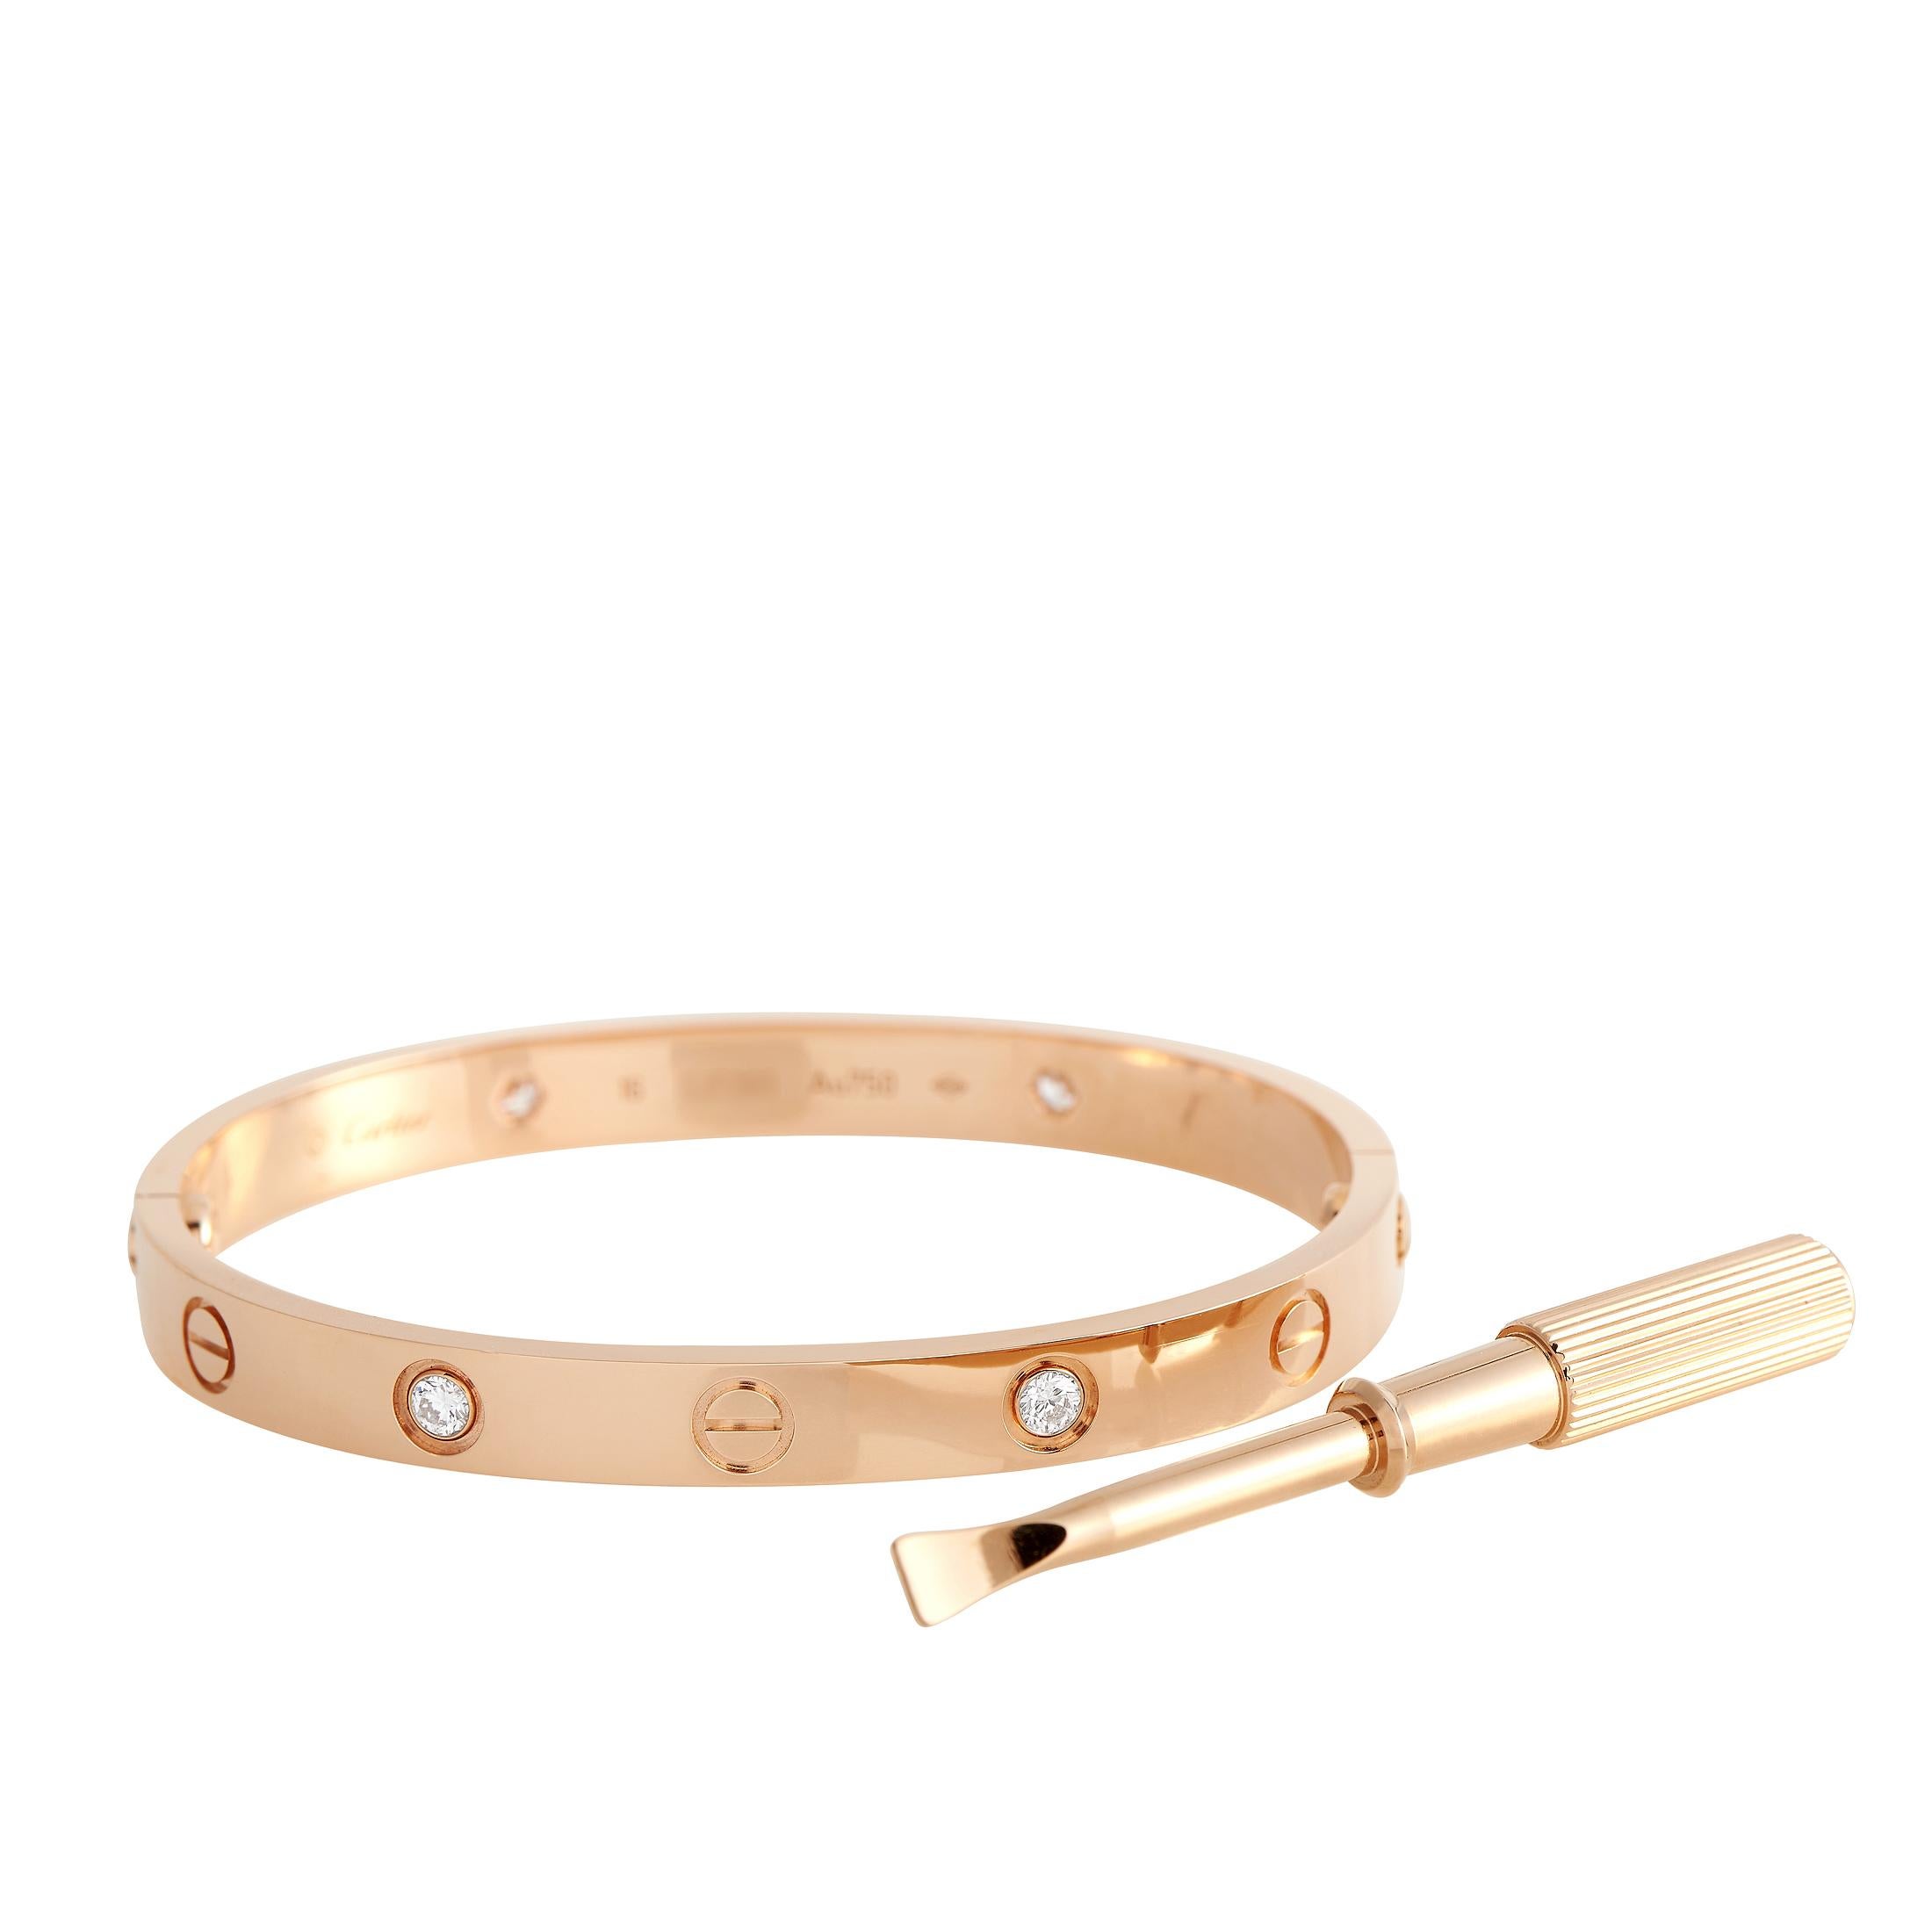 The Cartier LOVE Bracelet is your elegant and luxurious love lock. It is love in bejeweled form. An iconic design from Cartier, this bracelet features a rigid two-arc bangle bracelet design with a screw motif and a special screwdriver for opening or